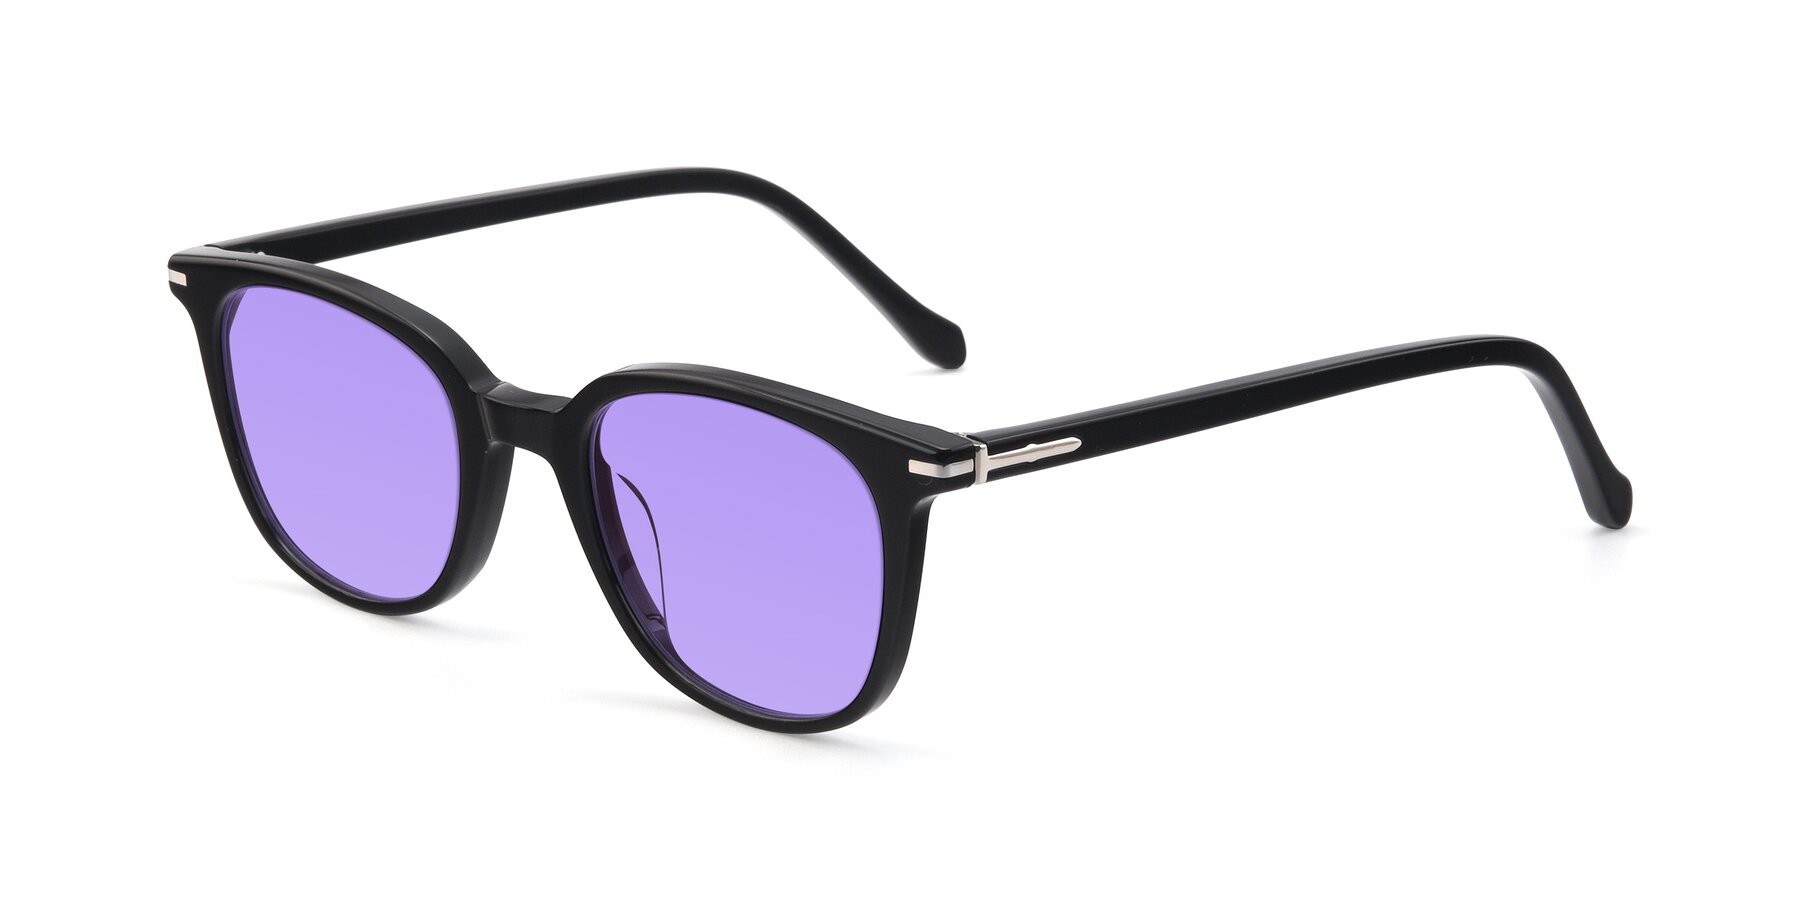 Angle of 17562 in Black with Medium Purple Tinted Lenses